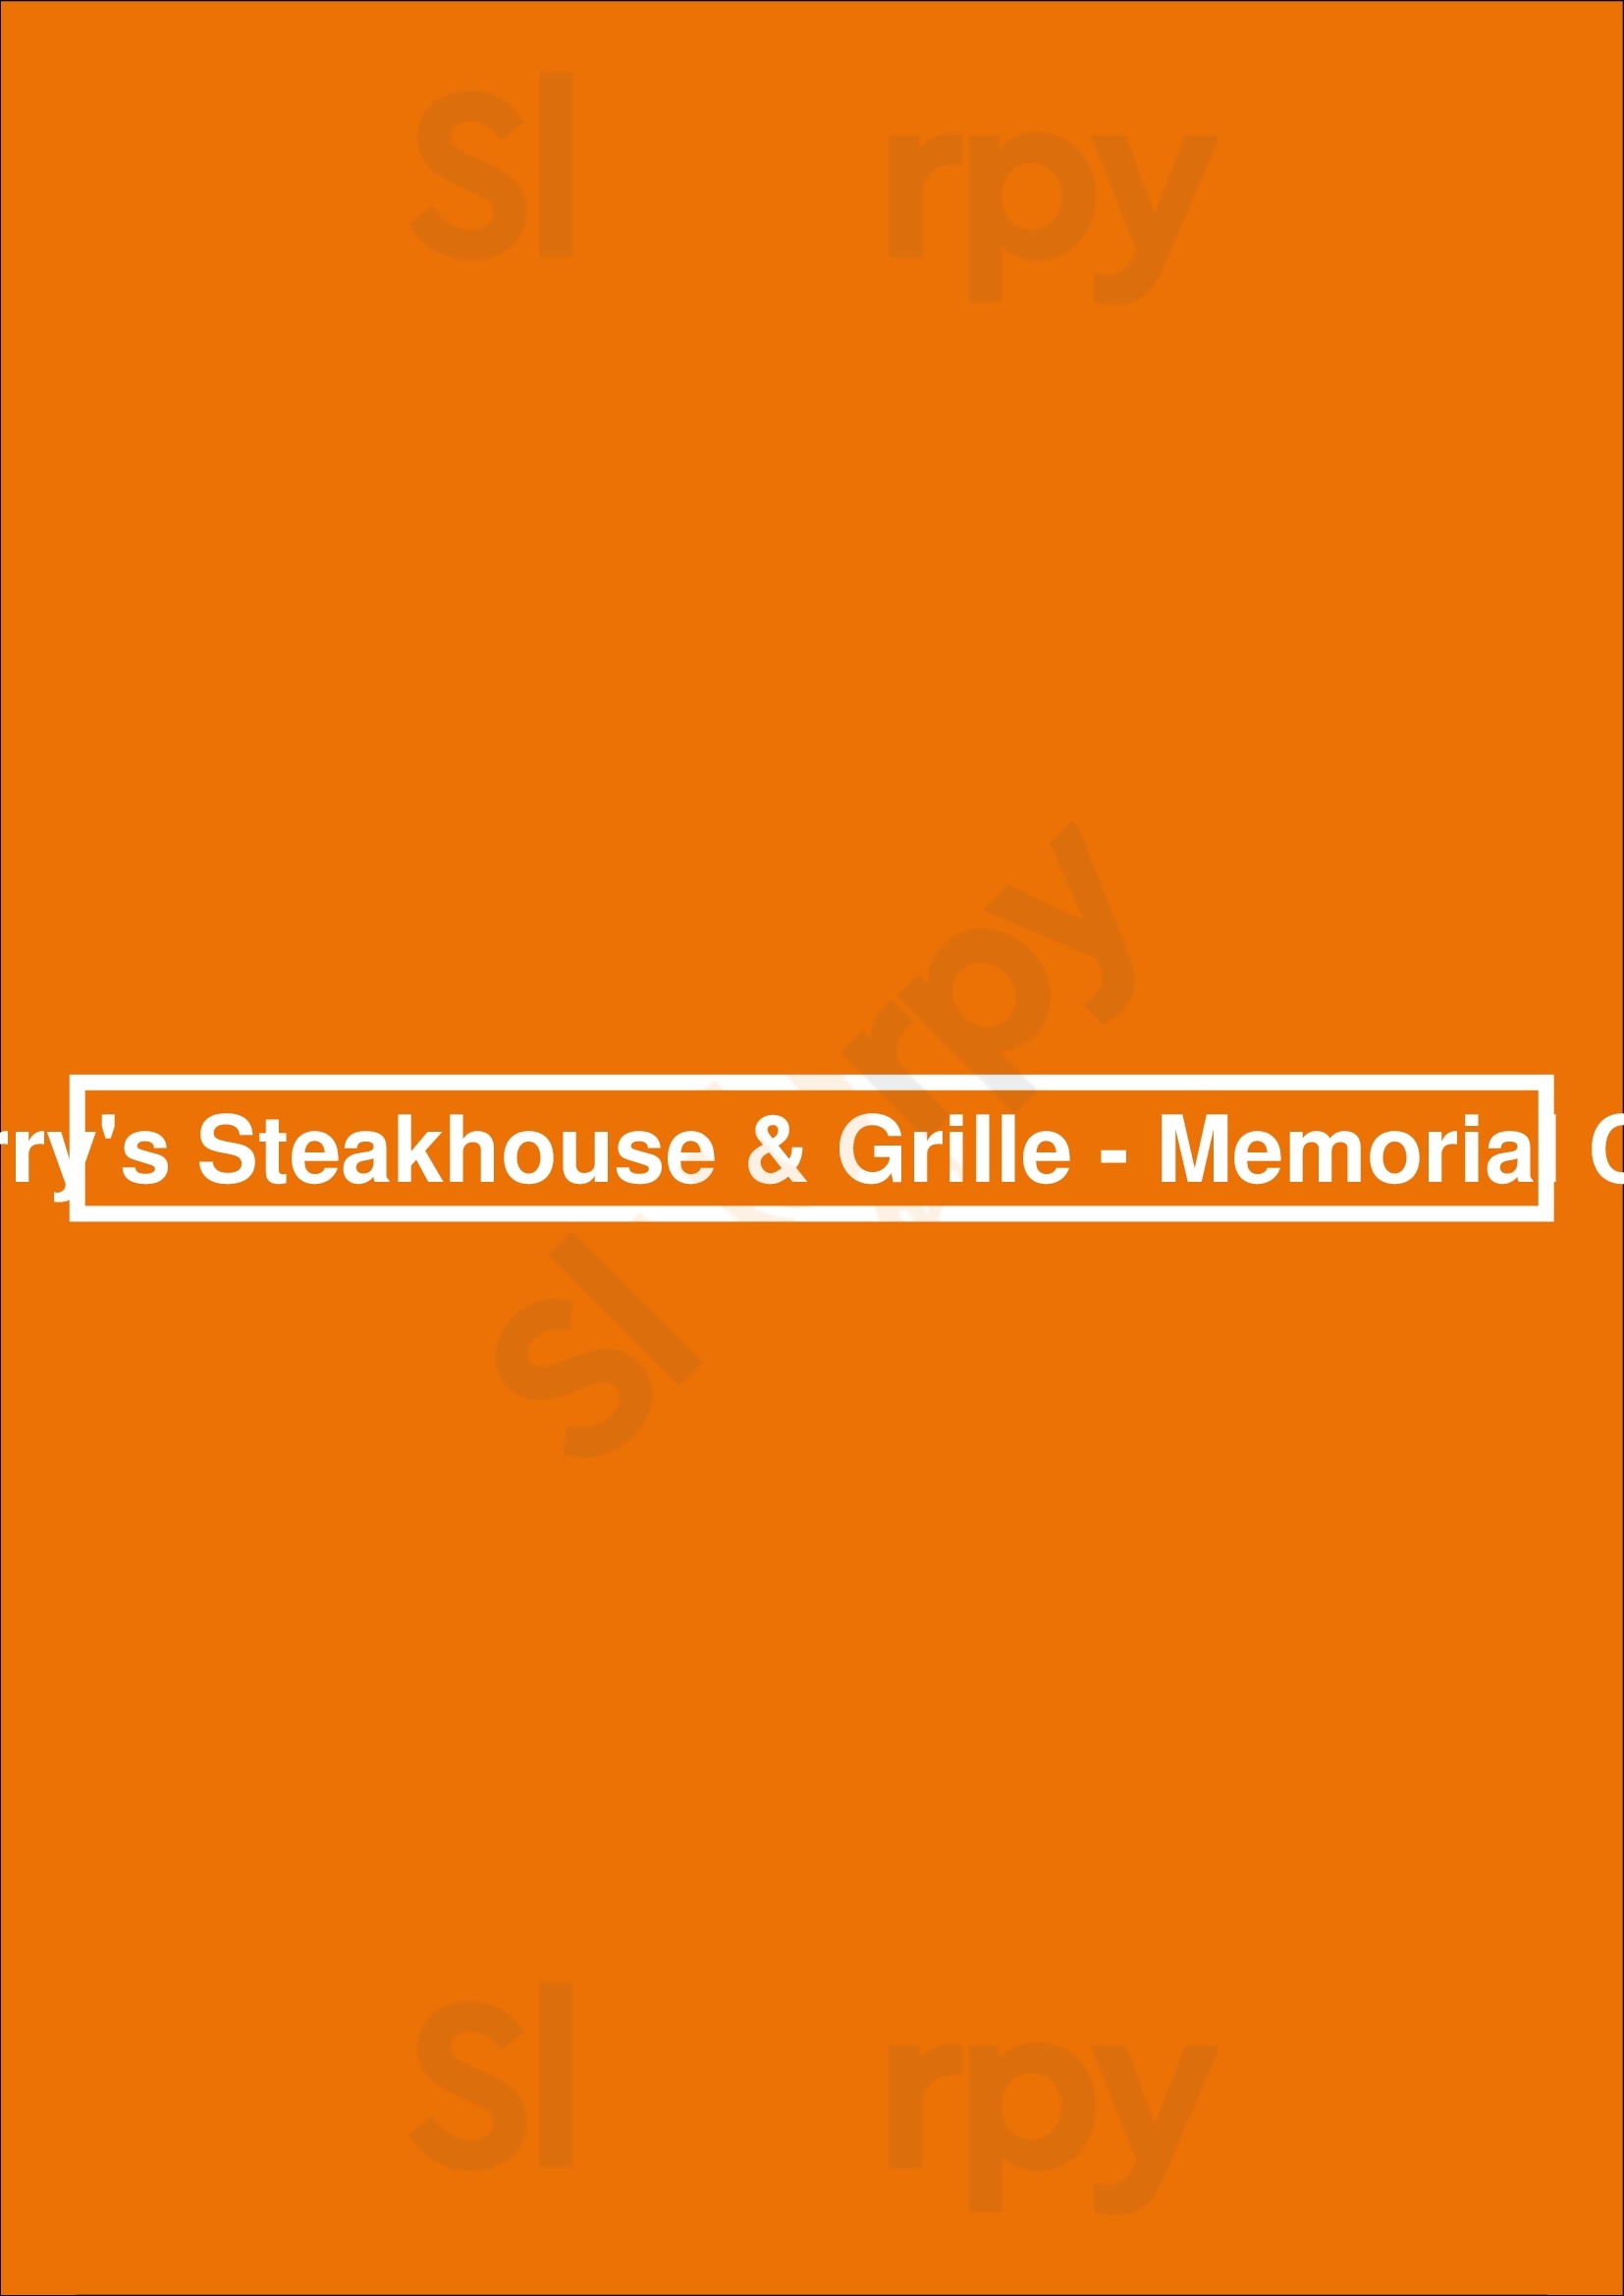 Perry's Steakhouse & Grille - Memorial City Houston Menu - 1